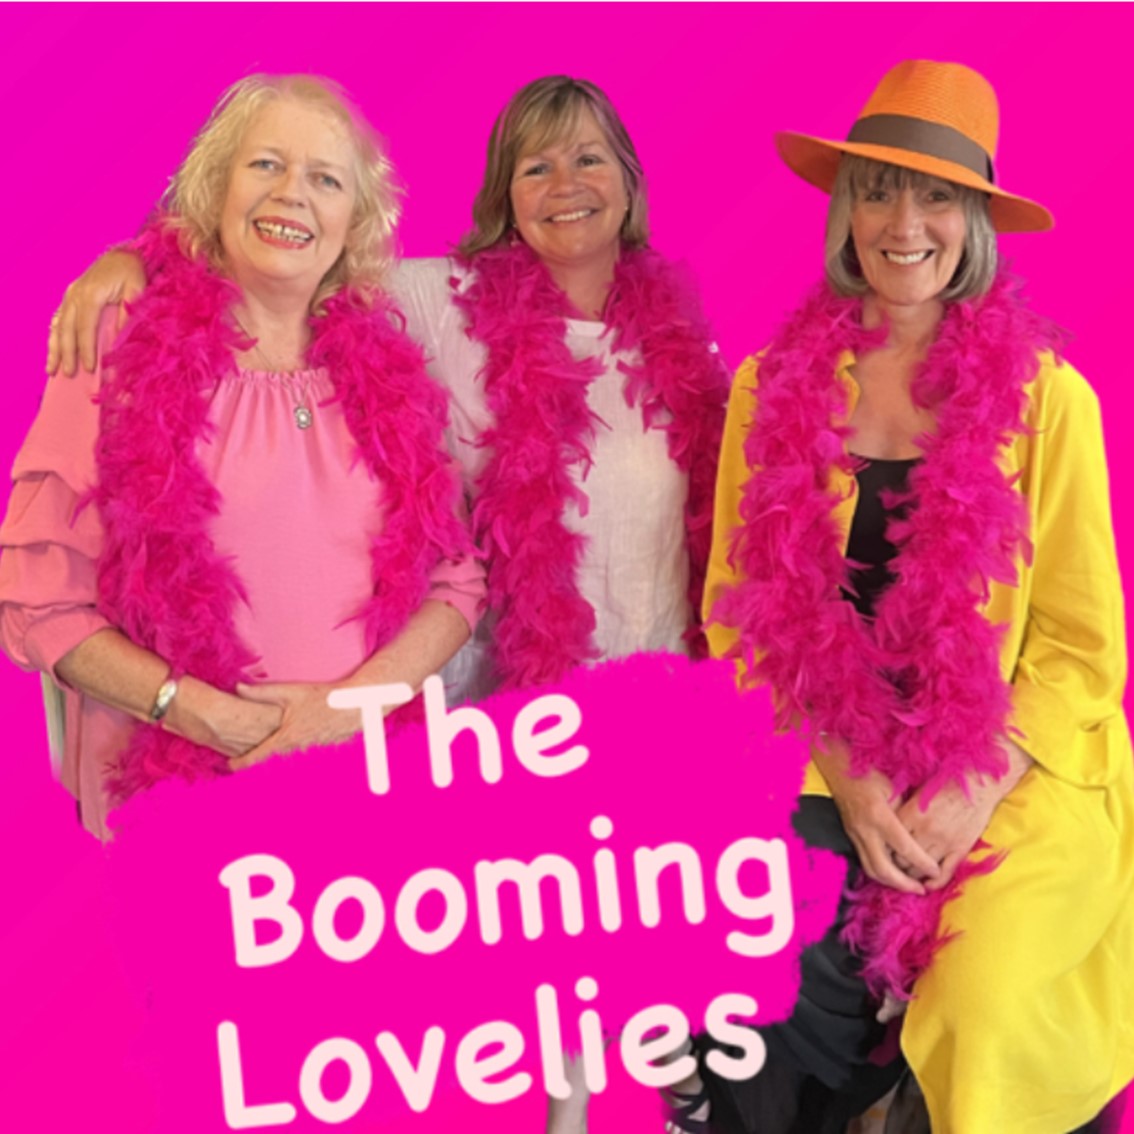 Meet the Booming Lovelies! A poetic Tour de Force! Here on 3 April at 7.30pm cranleigharts.org/event/the-boom… All welcome – there’s something for everyone – so relax and enjoy a wonderful performance! #bloominglovlies #fringe #cranleigharts #cranleigh #surrey